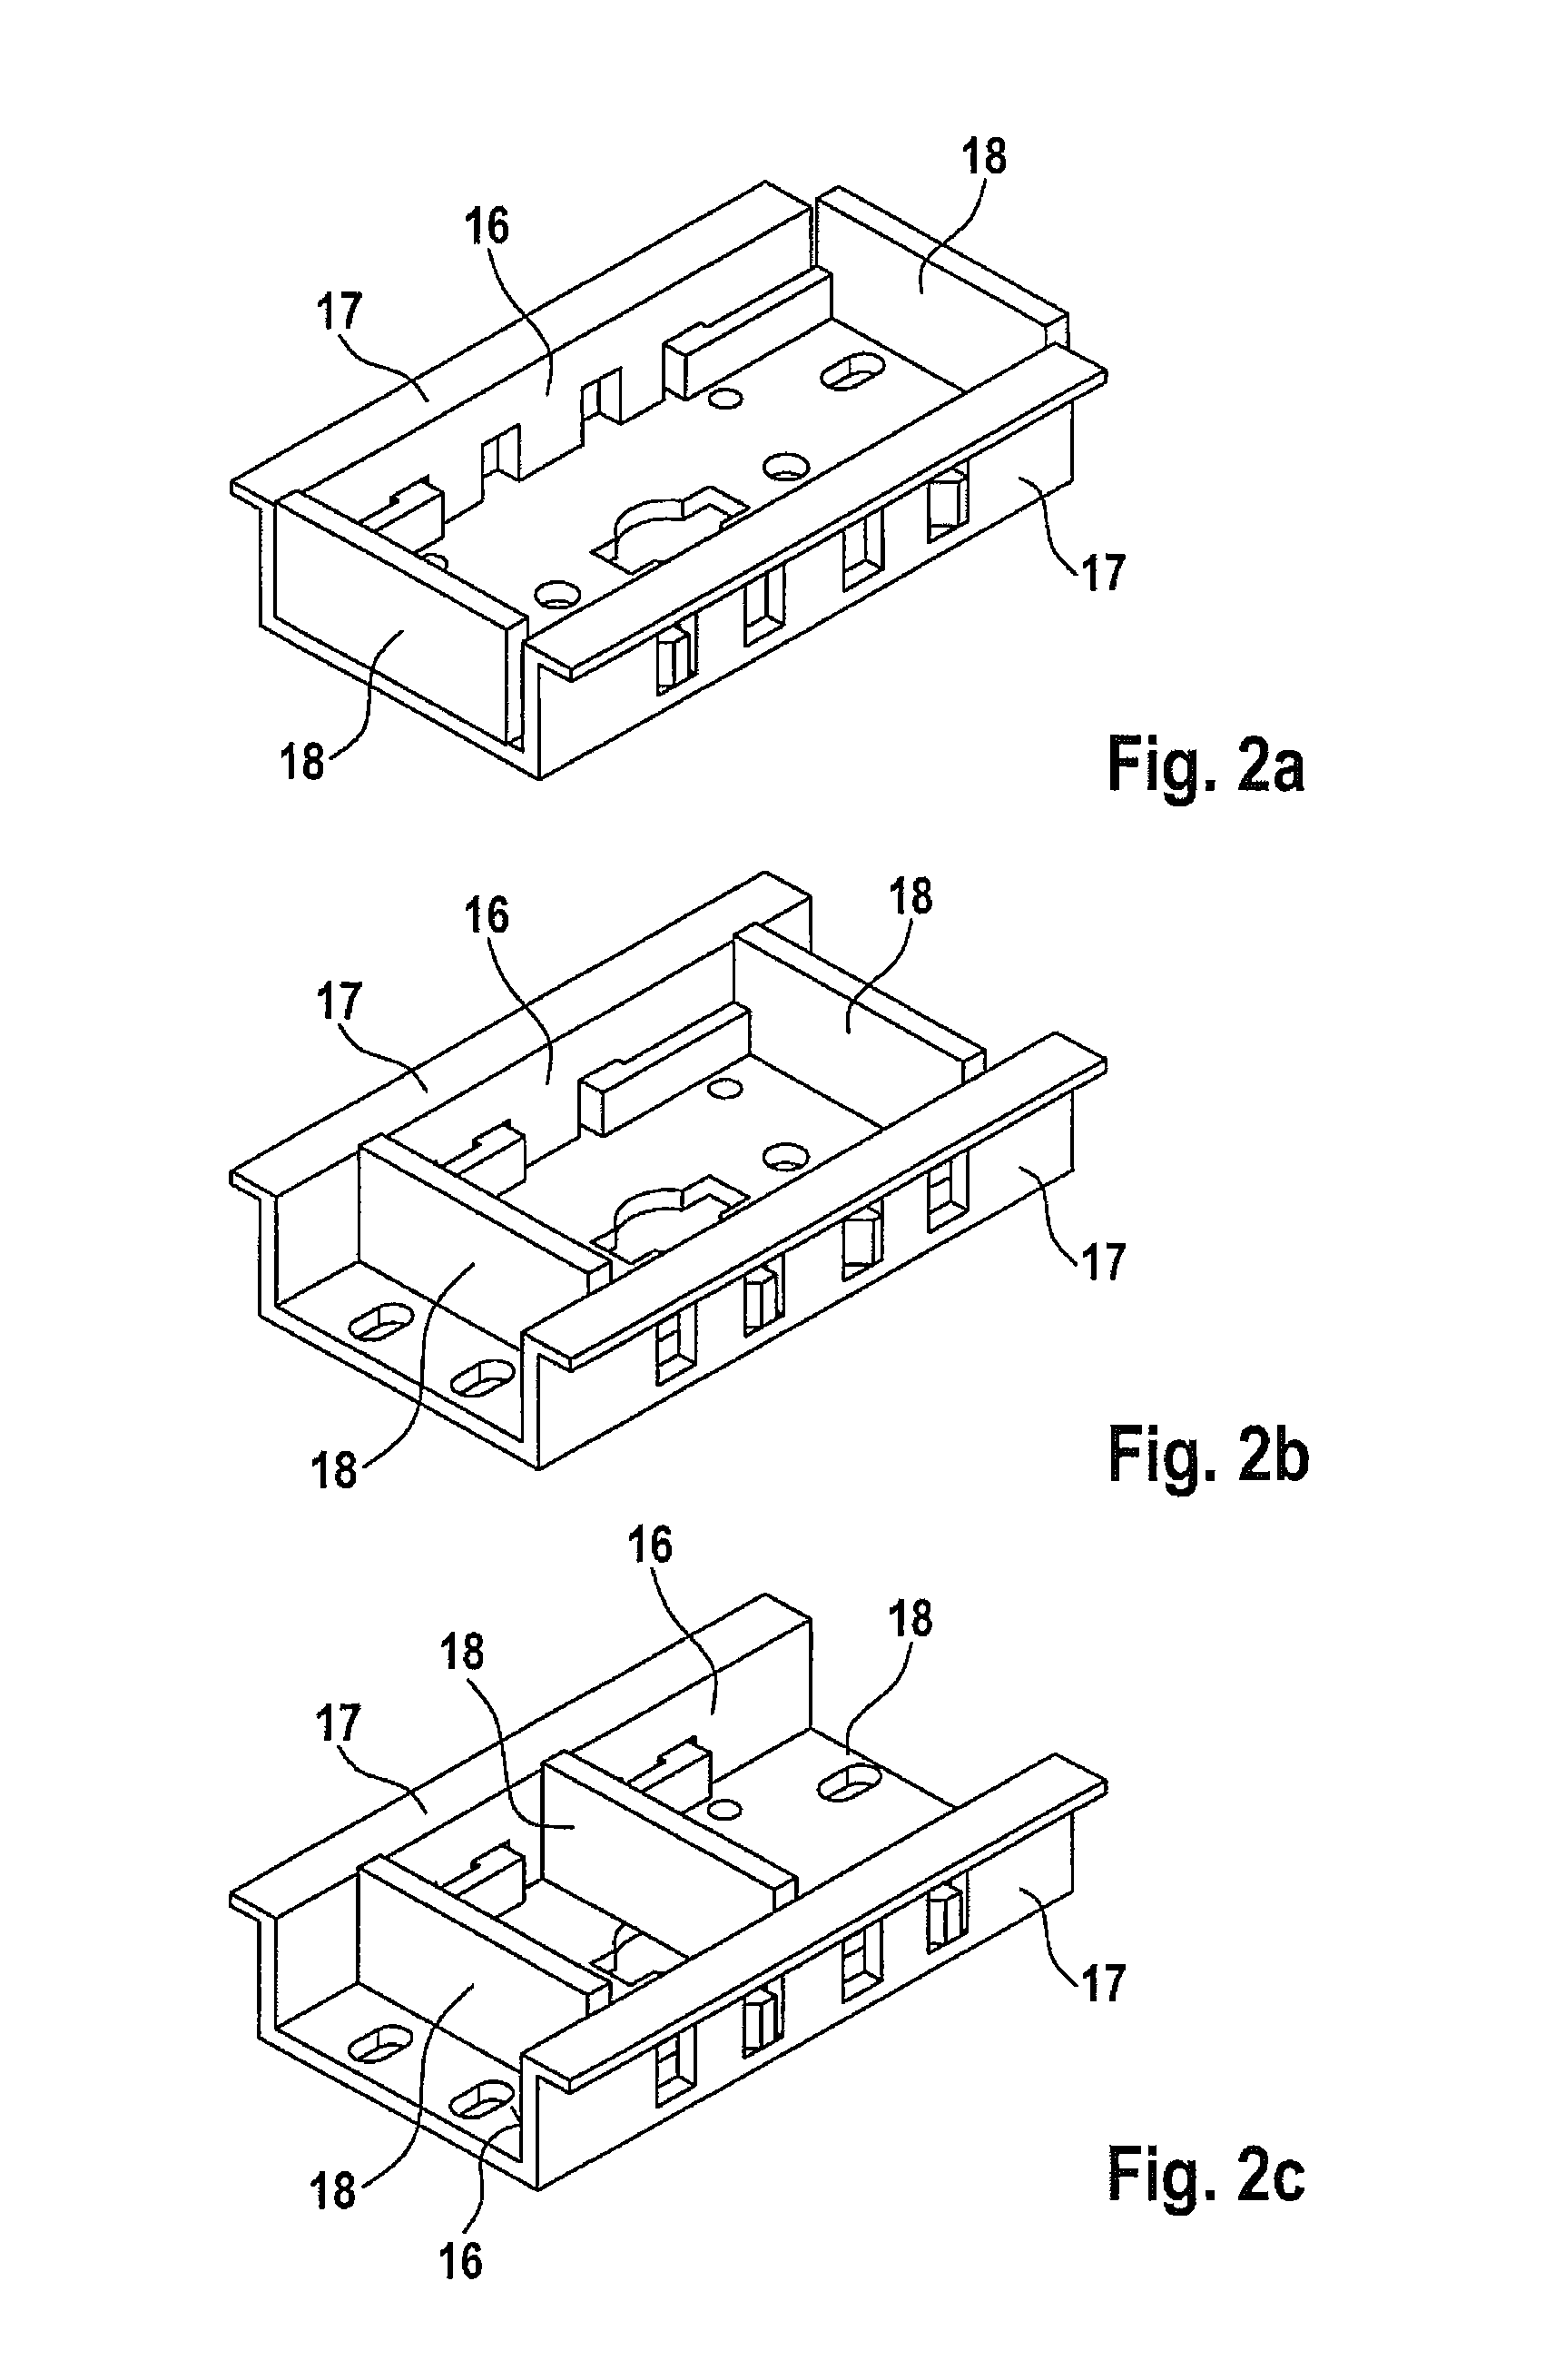 Busbar adapter comprising a mounting rail for attaching a switching device